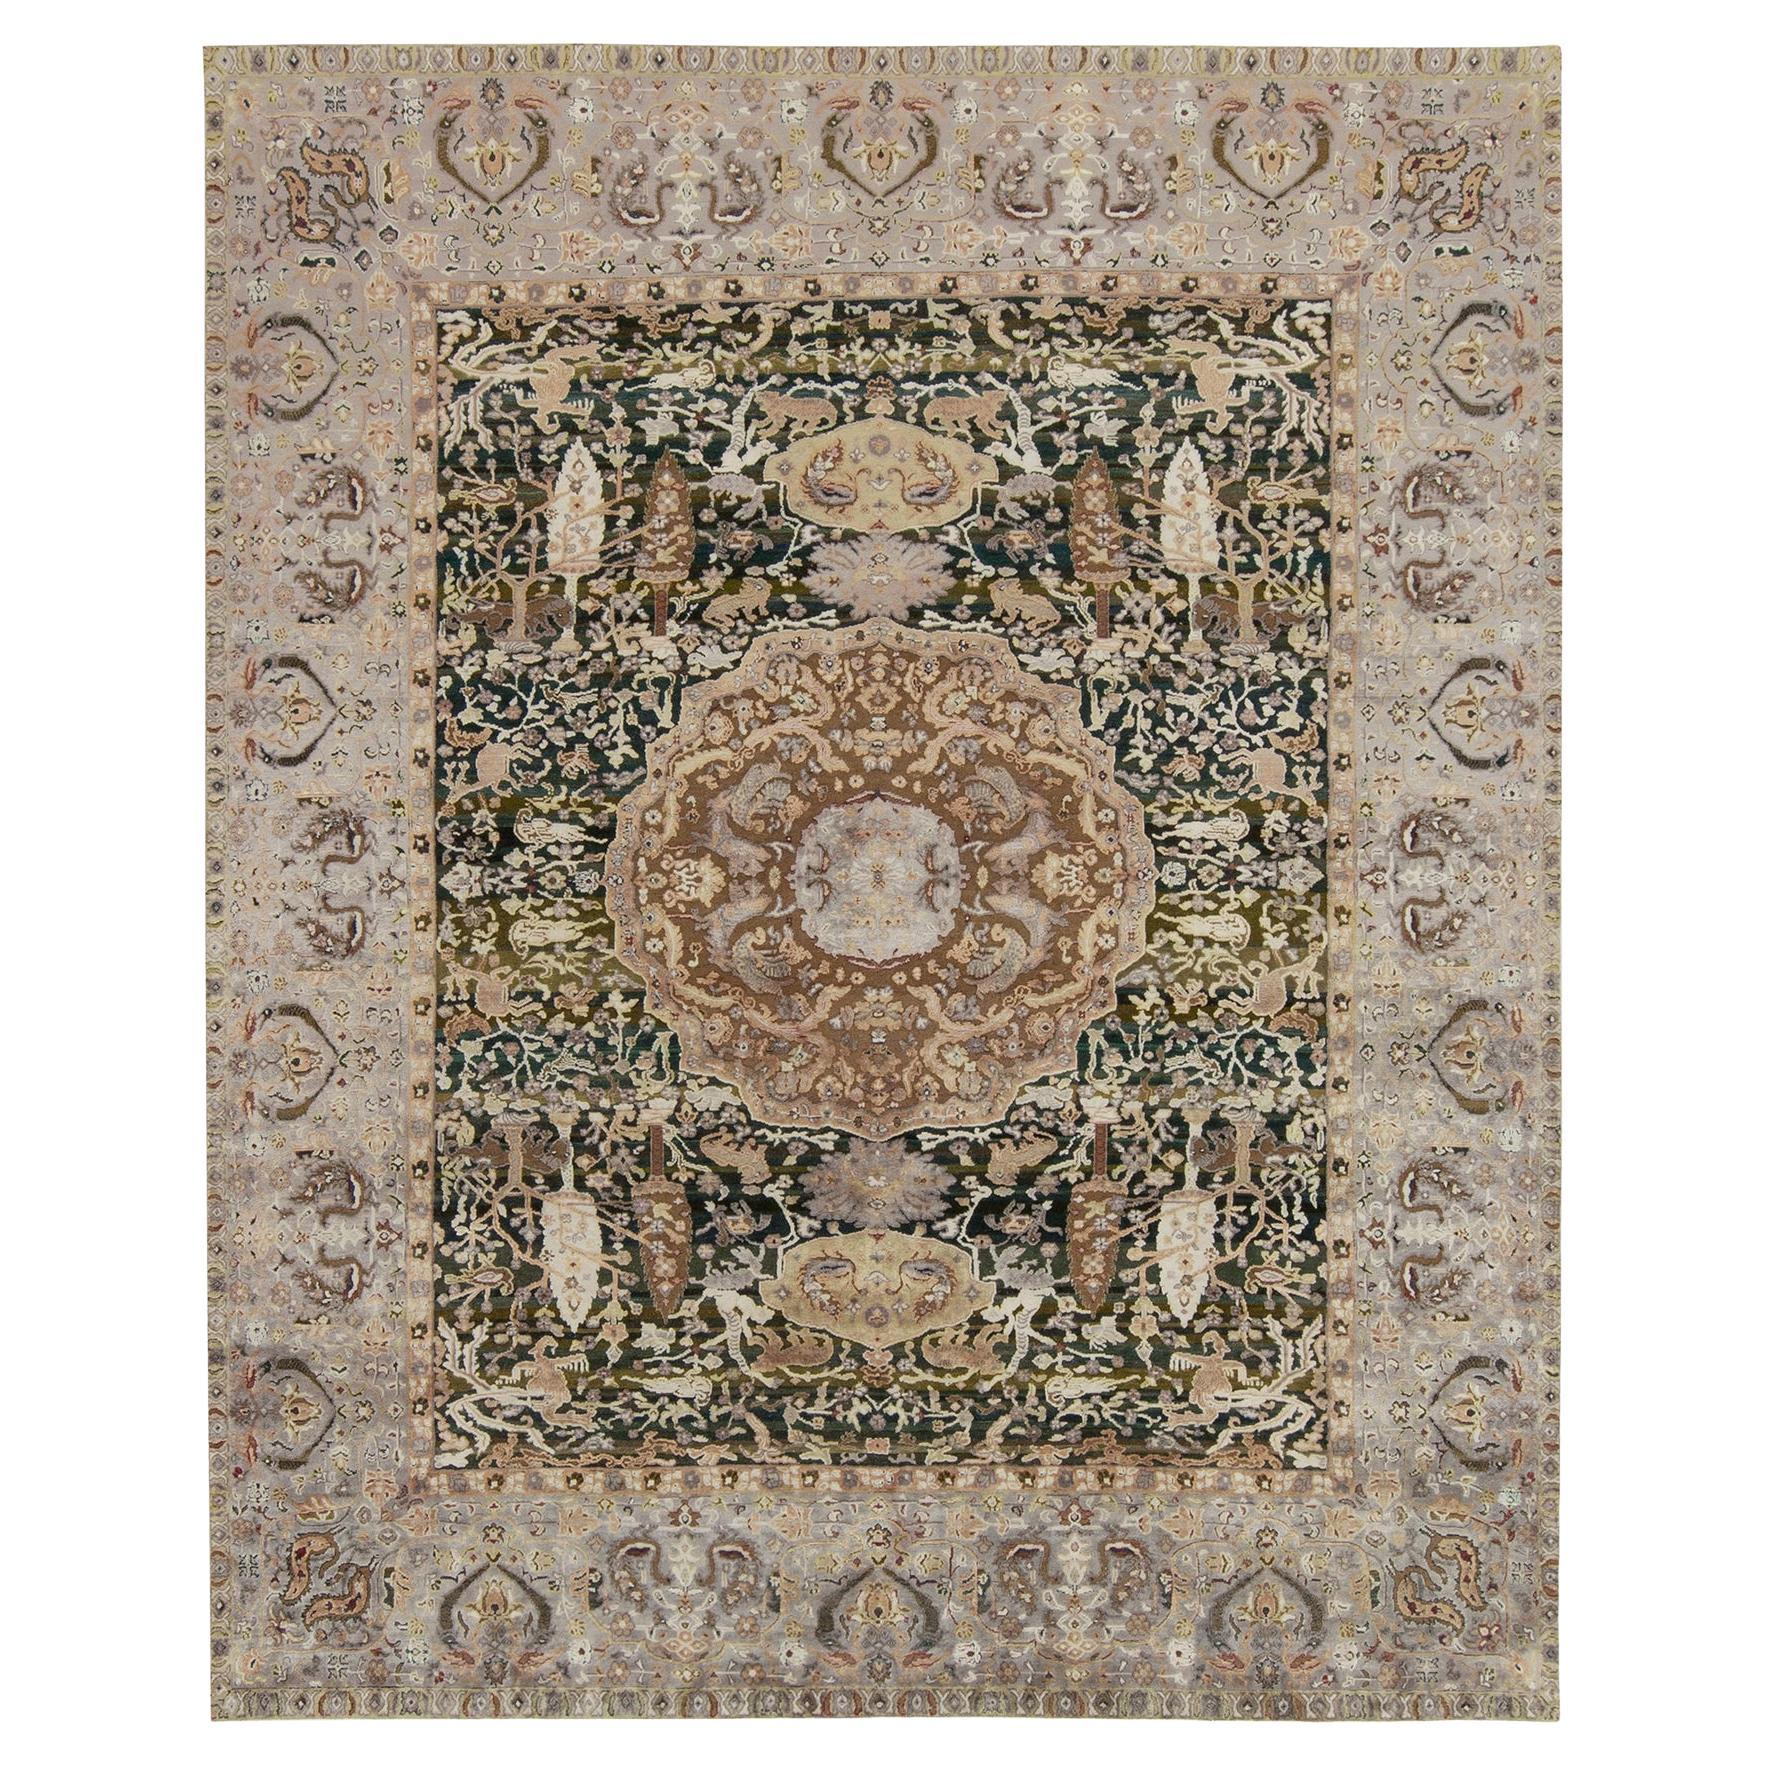 Rug & Kilim’s Classic Style Rug in Gray and Beige-Brown Floral Pattern